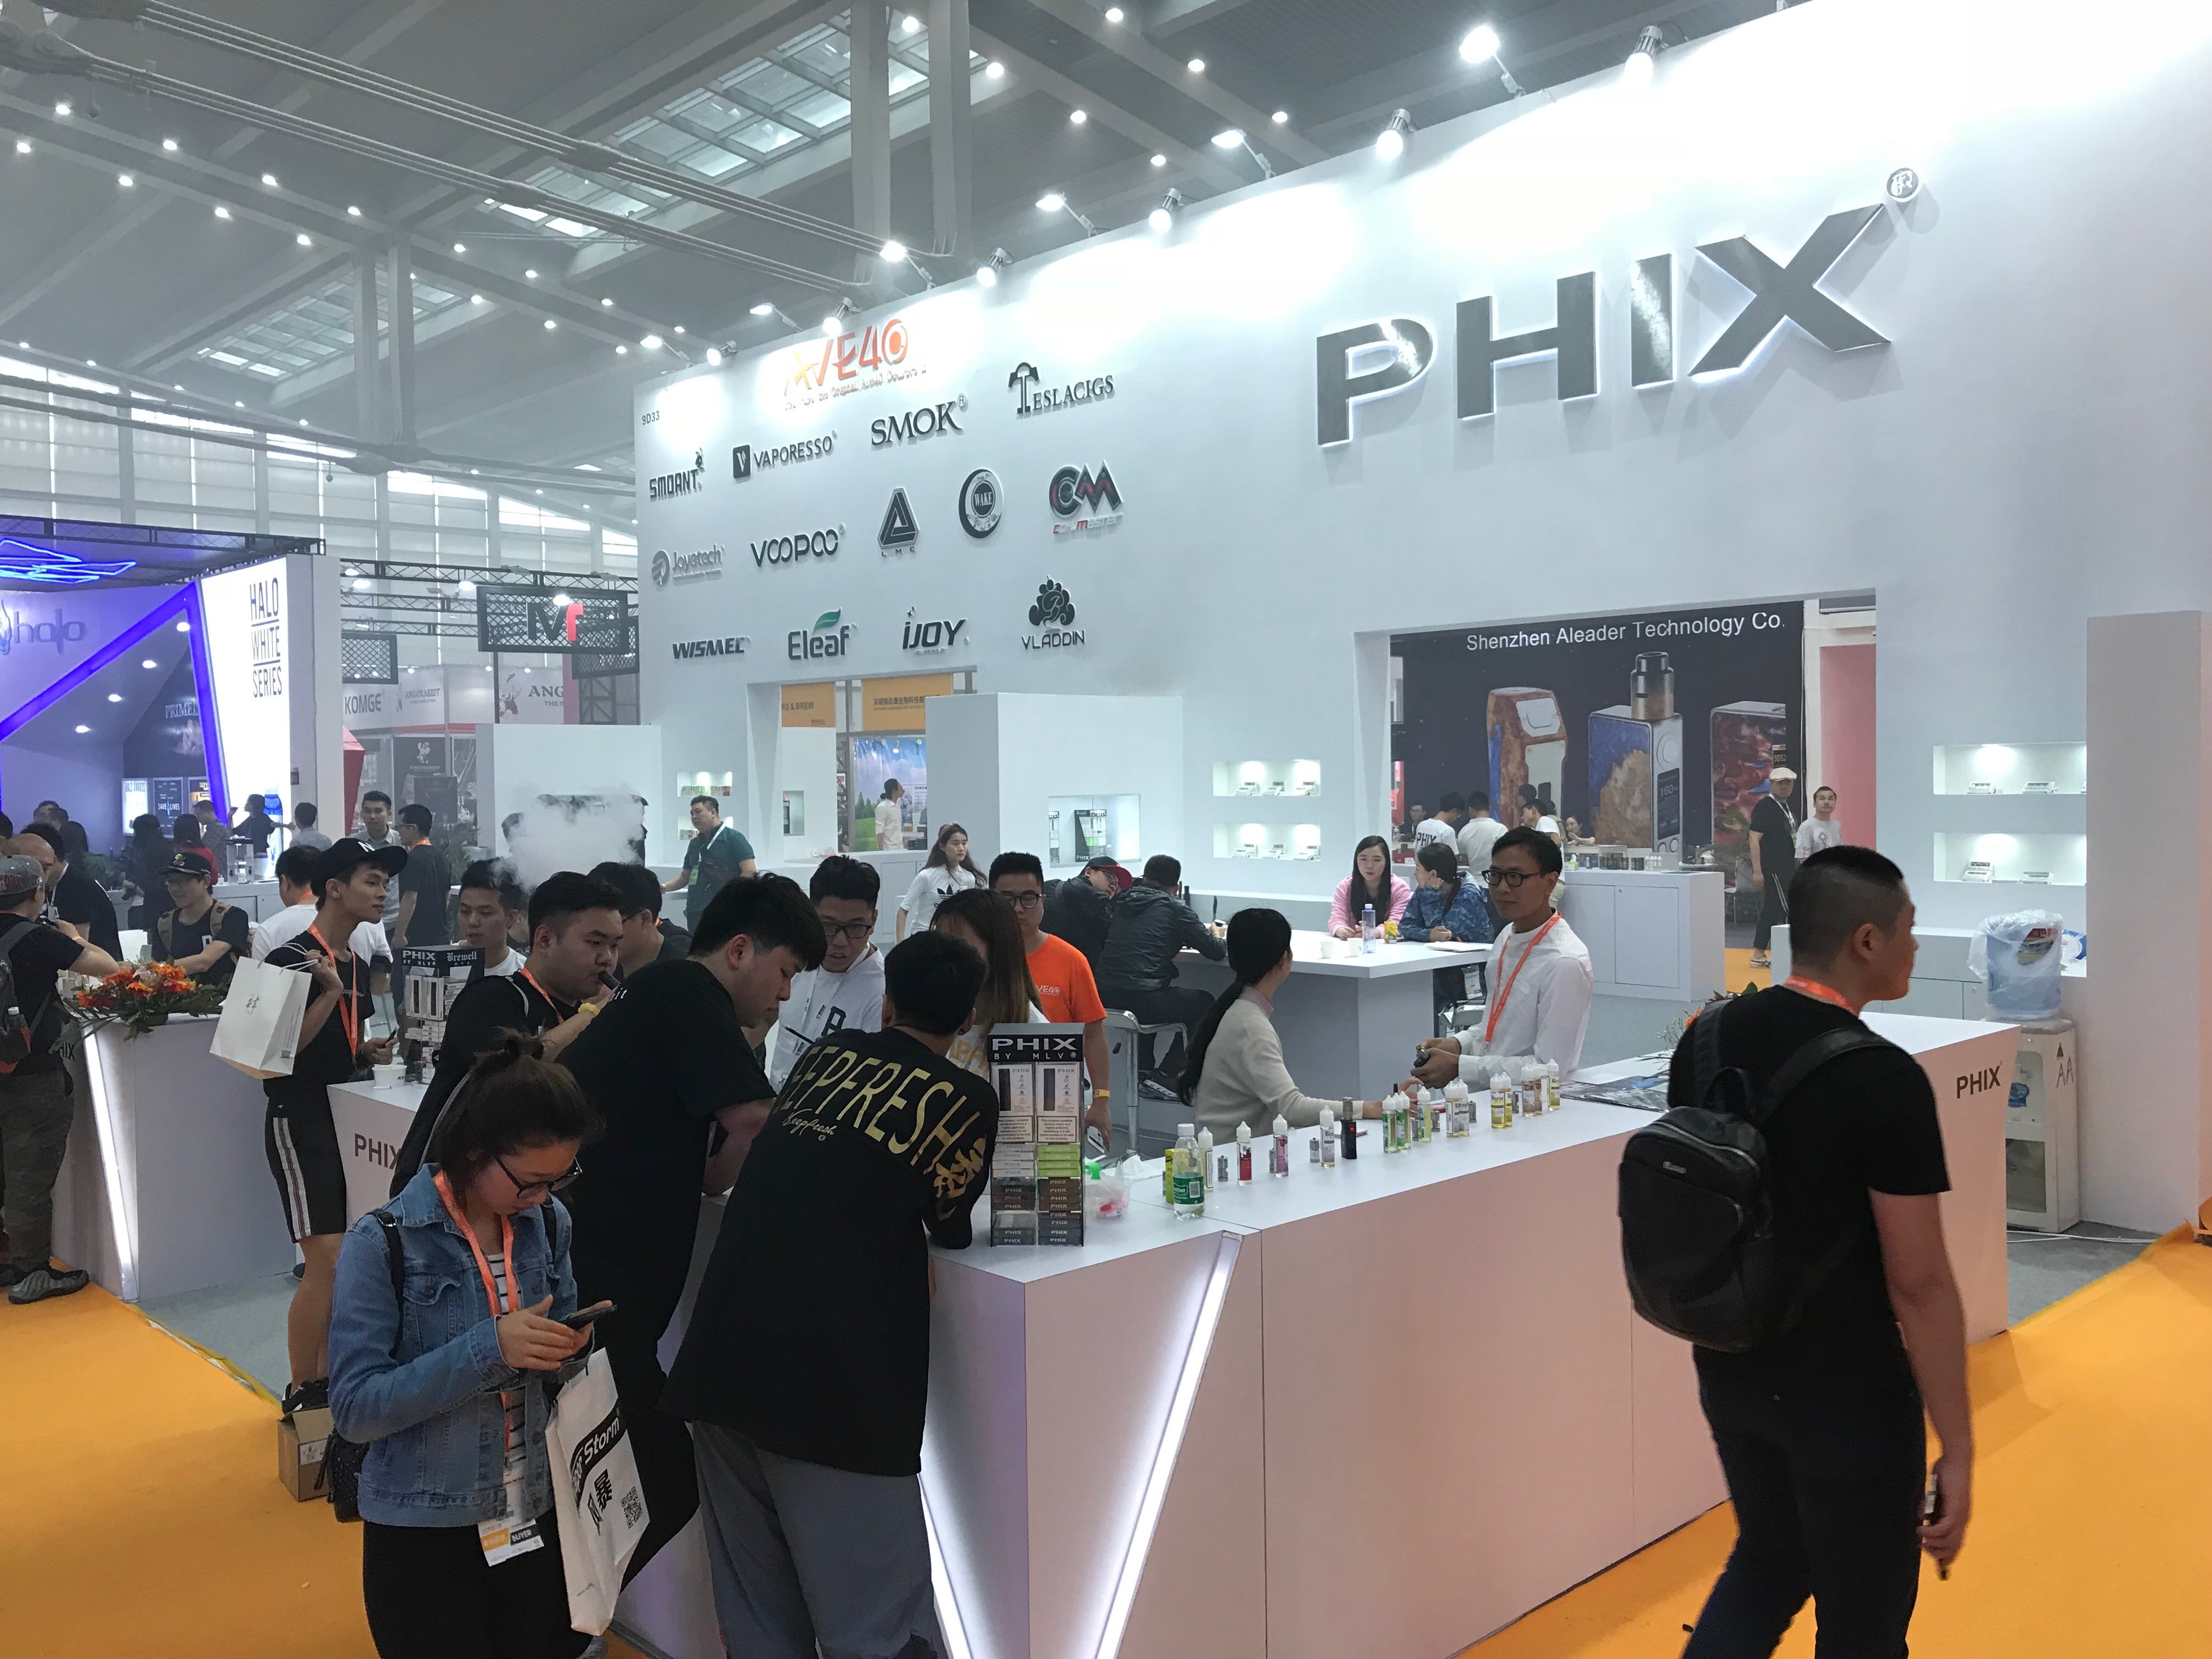 PHIX | Brewell MFG at IECIE Shenzhen Ecig Expo 2018